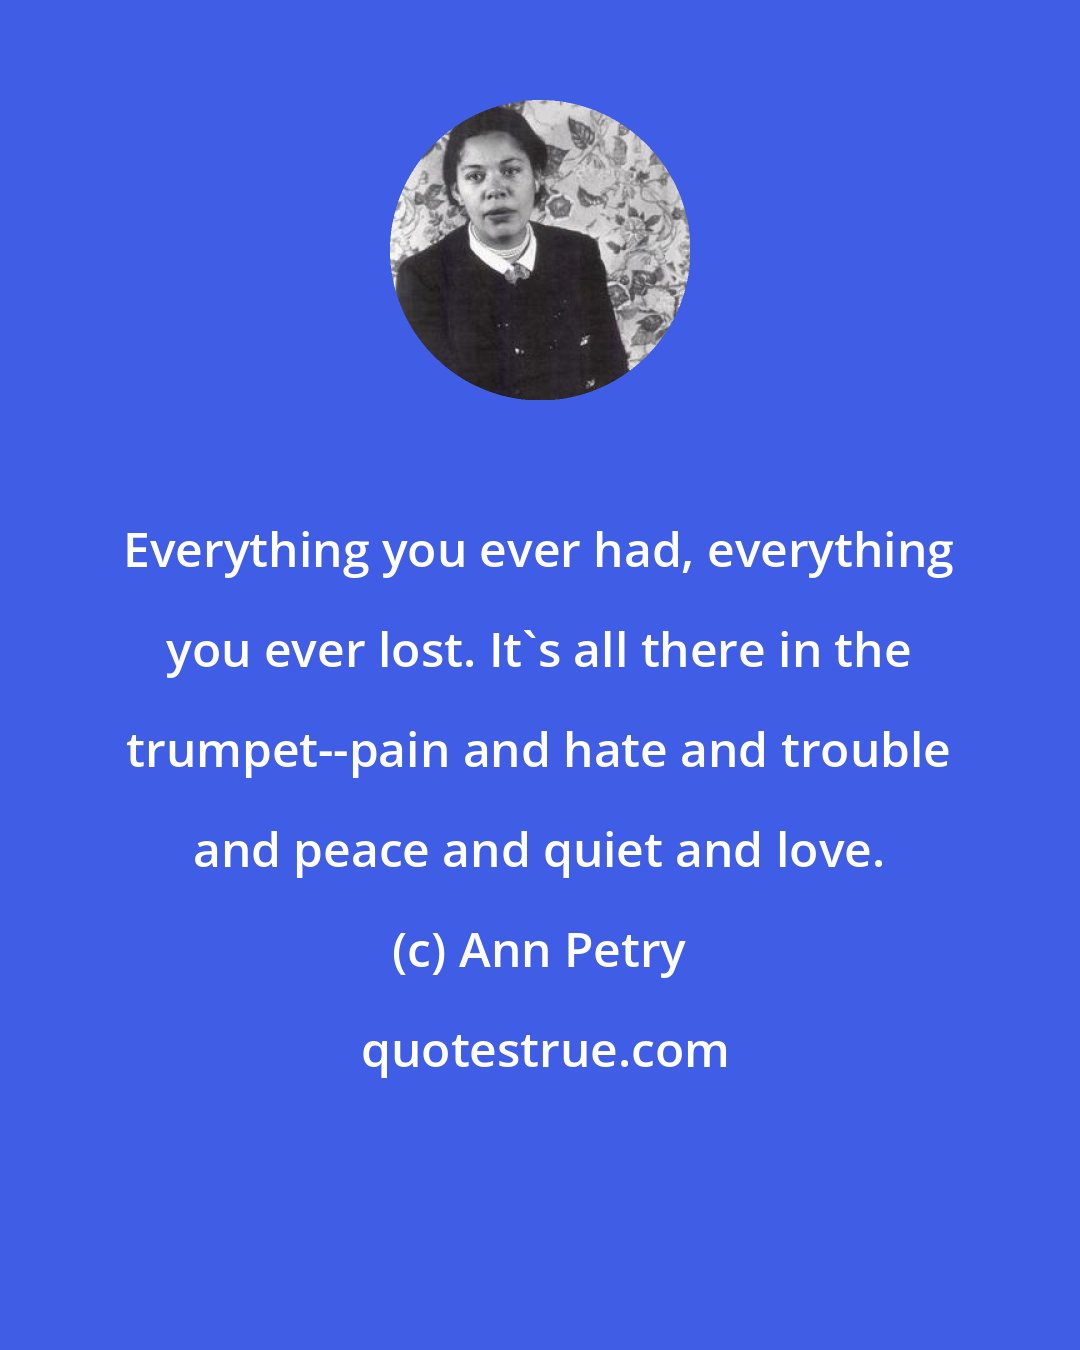 Ann Petry: Everything you ever had, everything you ever lost. It's all there in the trumpet--pain and hate and trouble and peace and quiet and love.